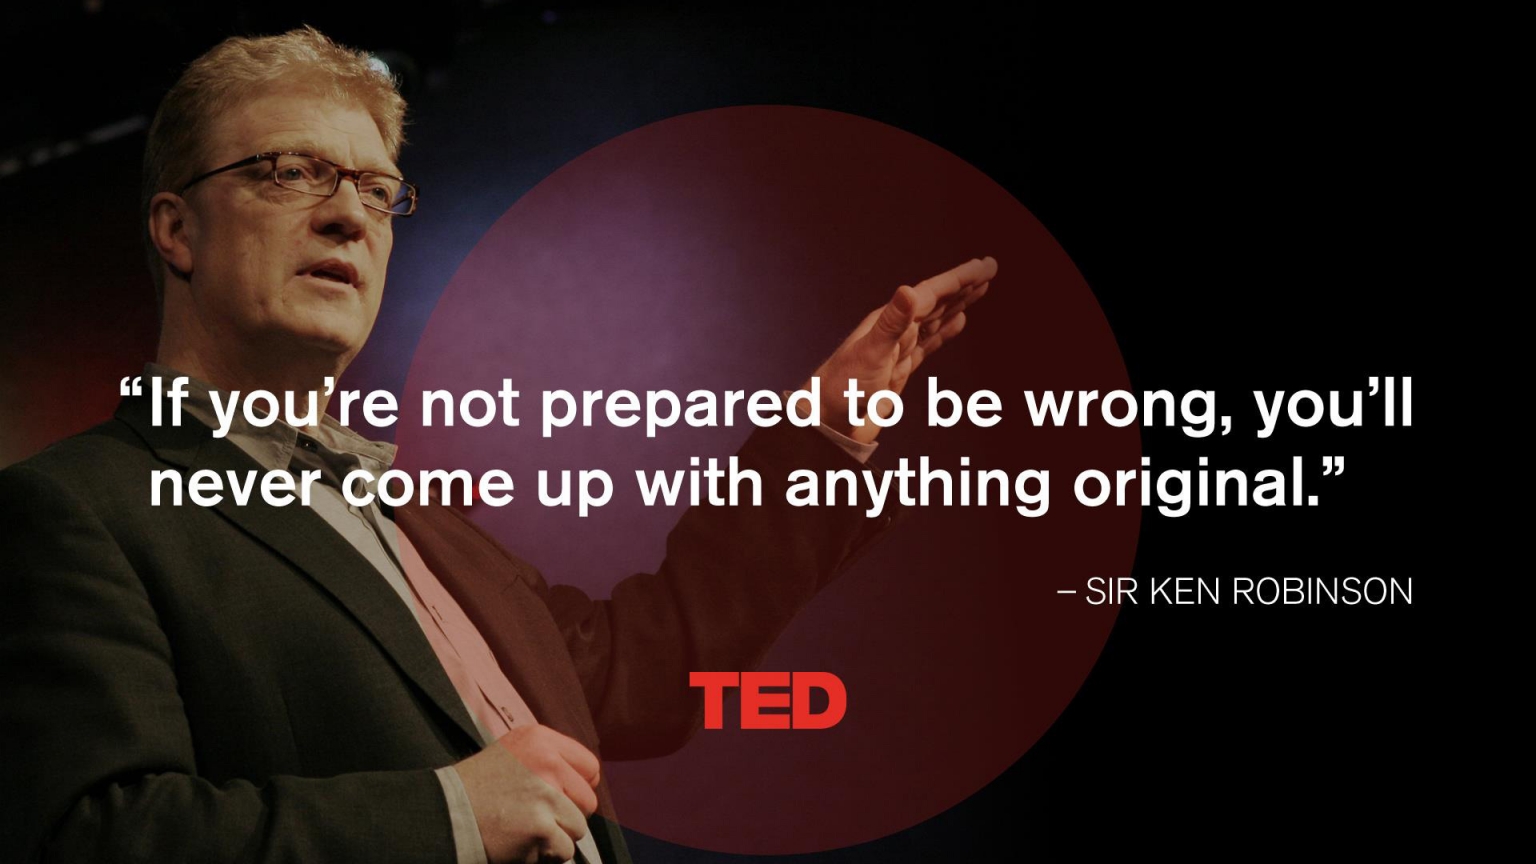 Sir Ken Robinson Quote for 1536 x 864 HDTV resolution